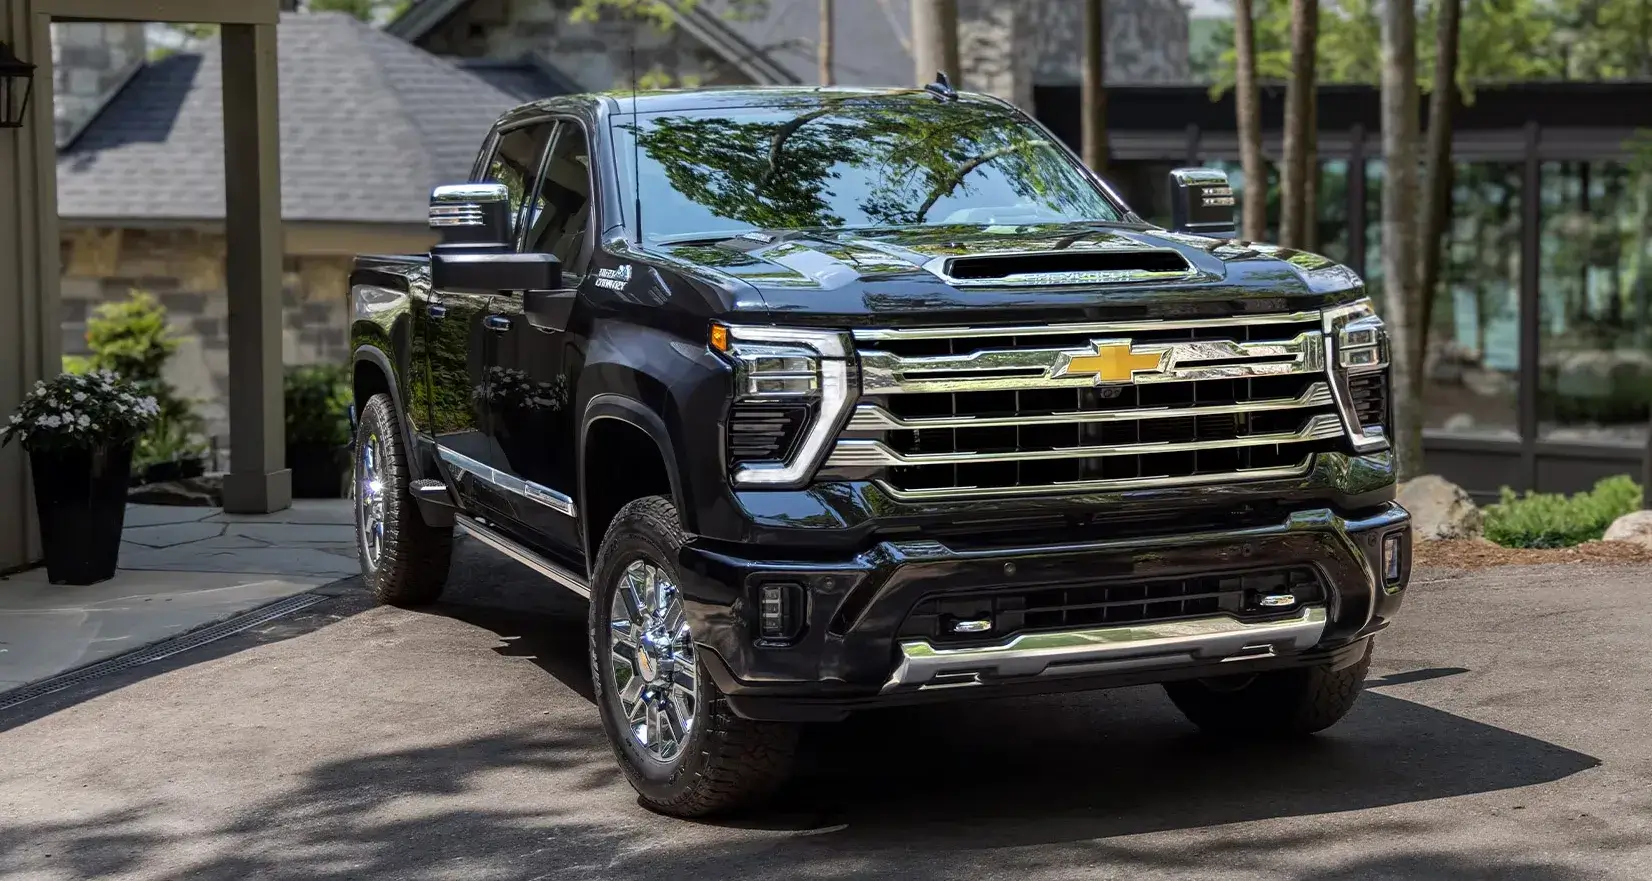 General Motors to Invest Over $1 Billion in Next-Generation Heavy-Duty Pickups